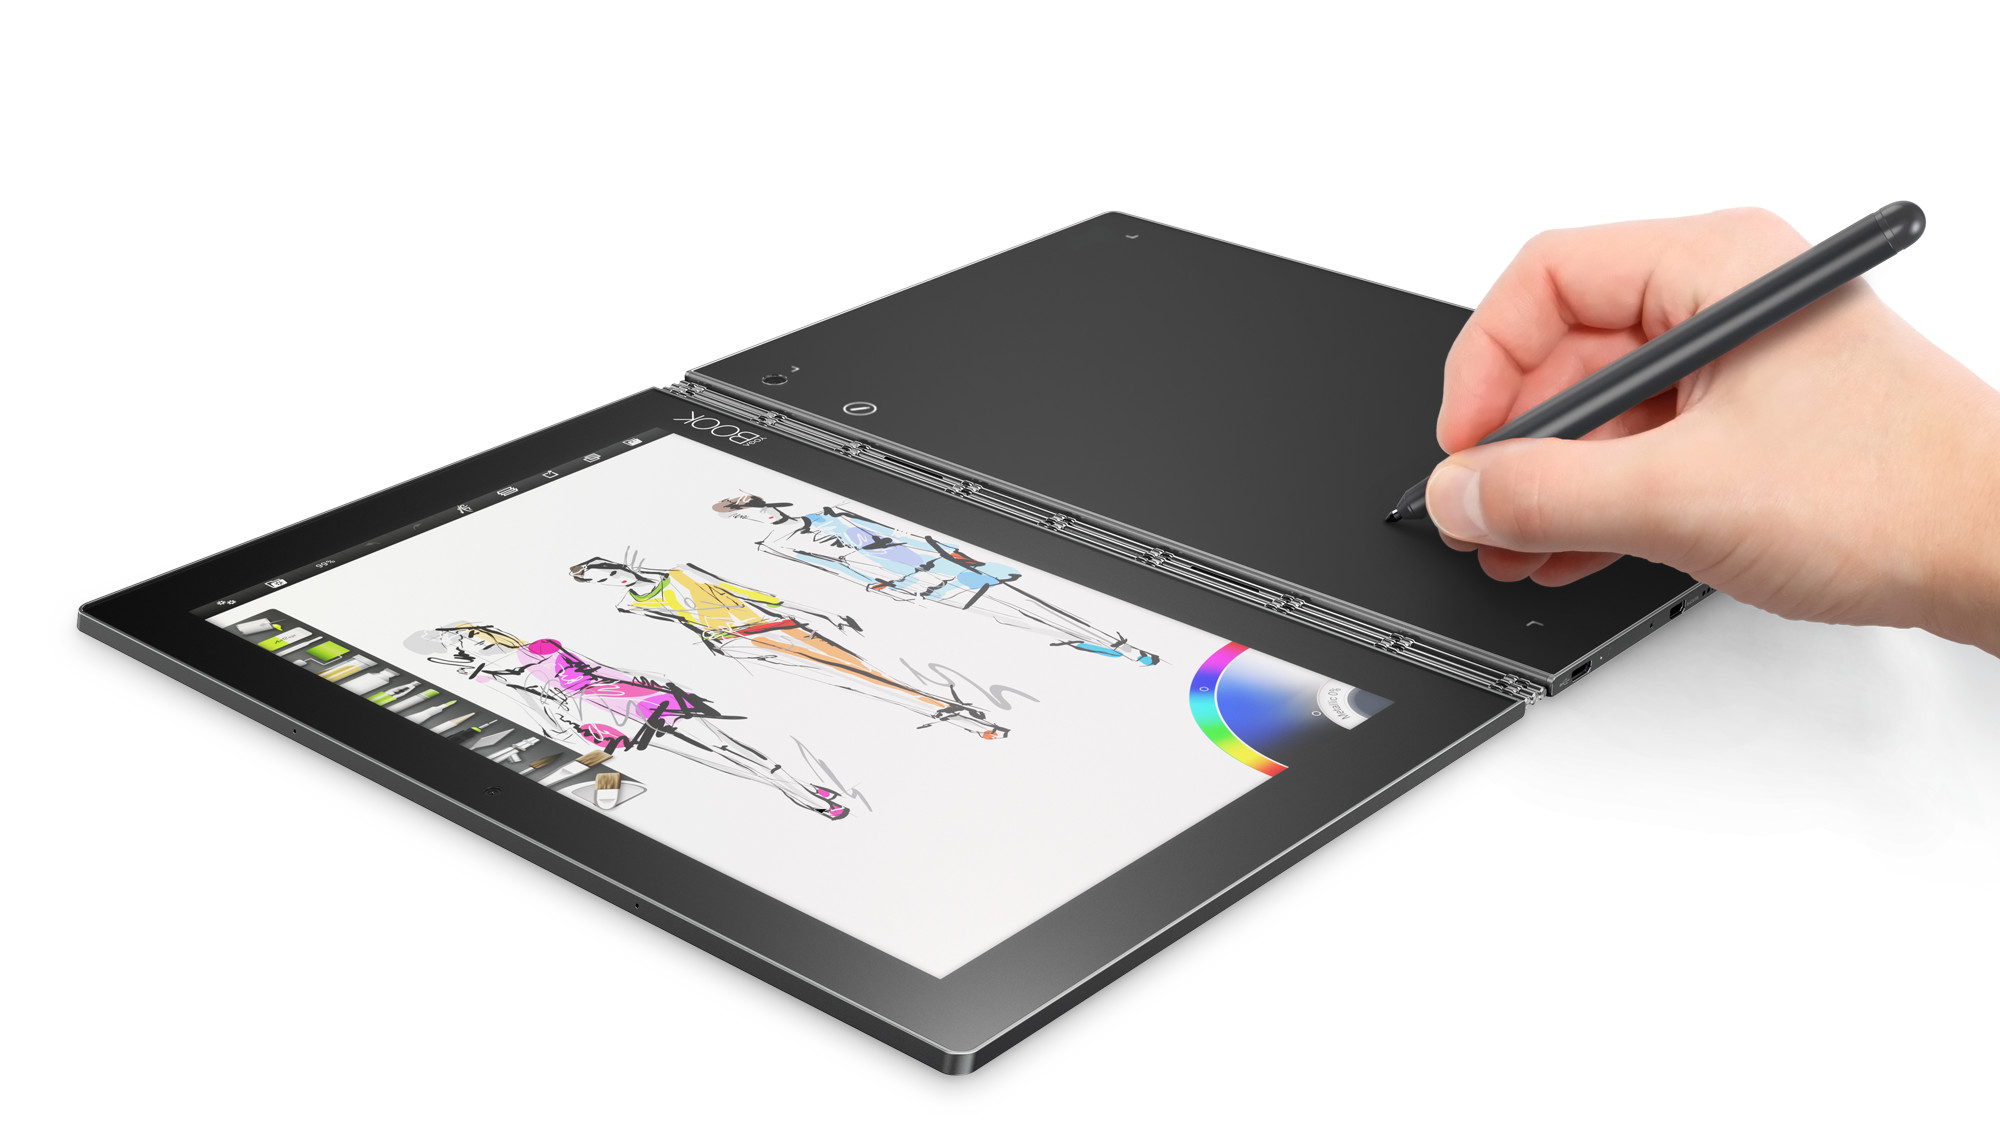 12_yoga_book_painting_creat_mode_portrait_drawing_pad.png